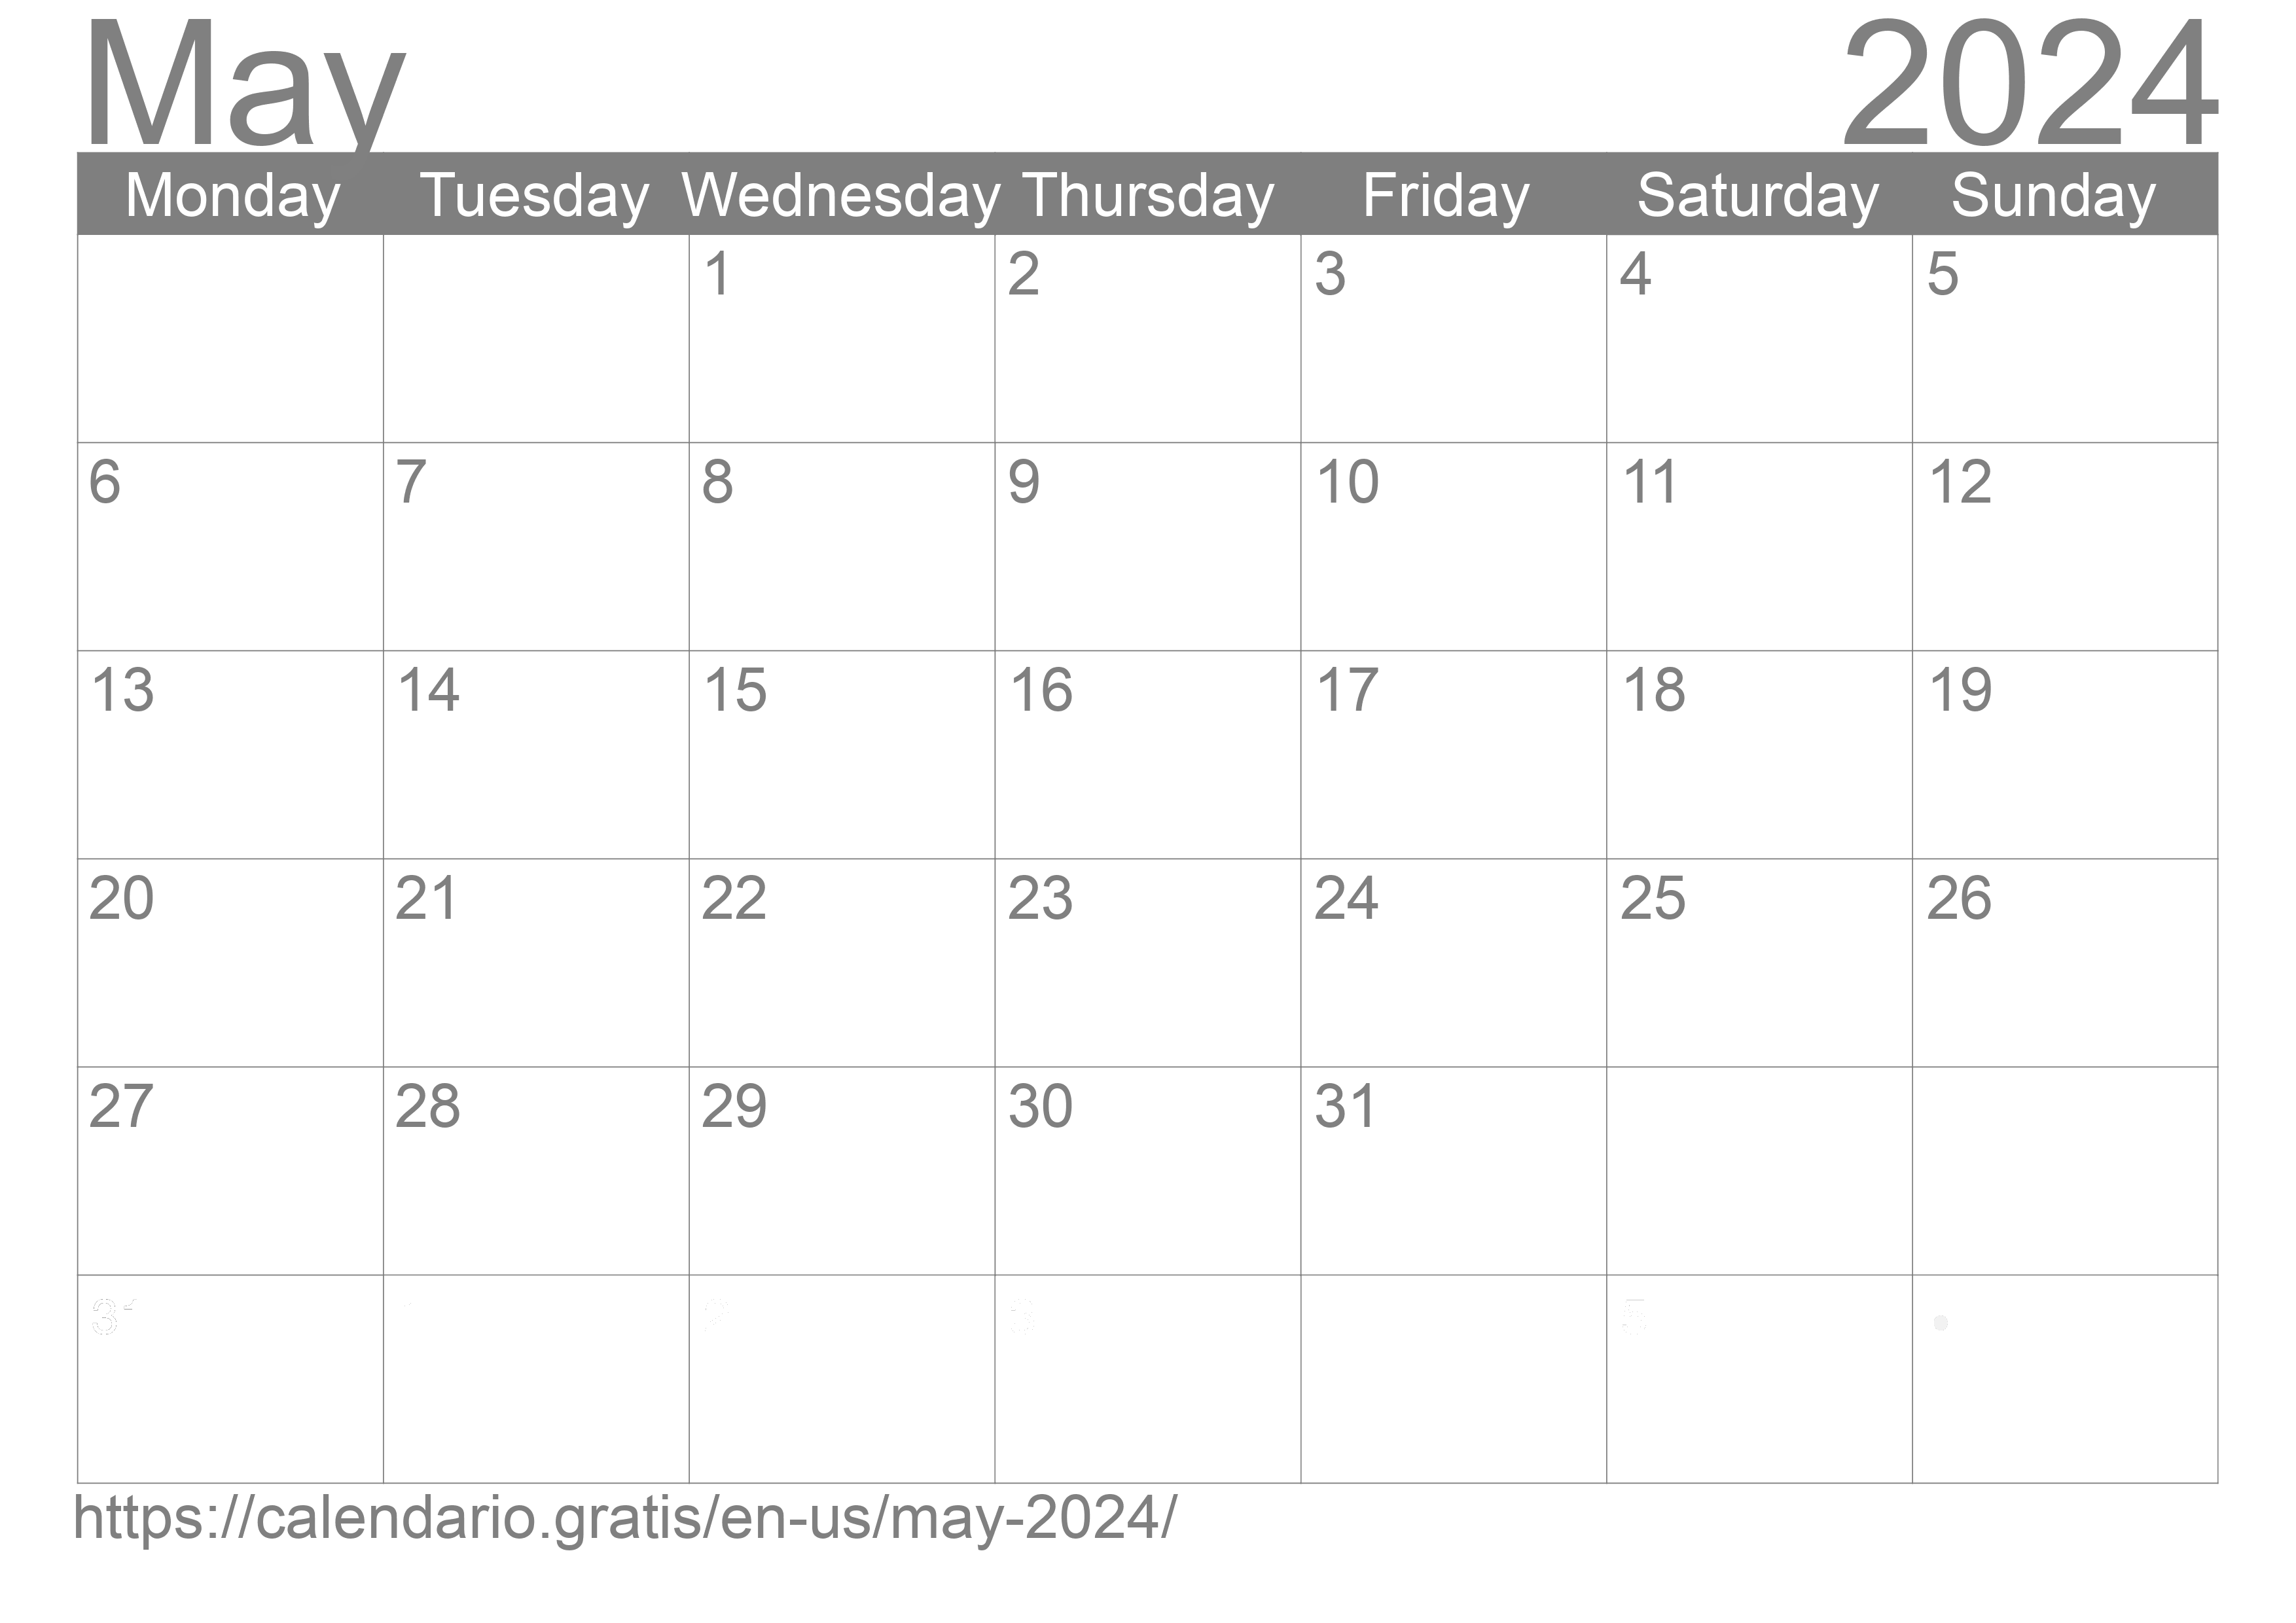 Calendar May 2024 from United States of America in English ☑️